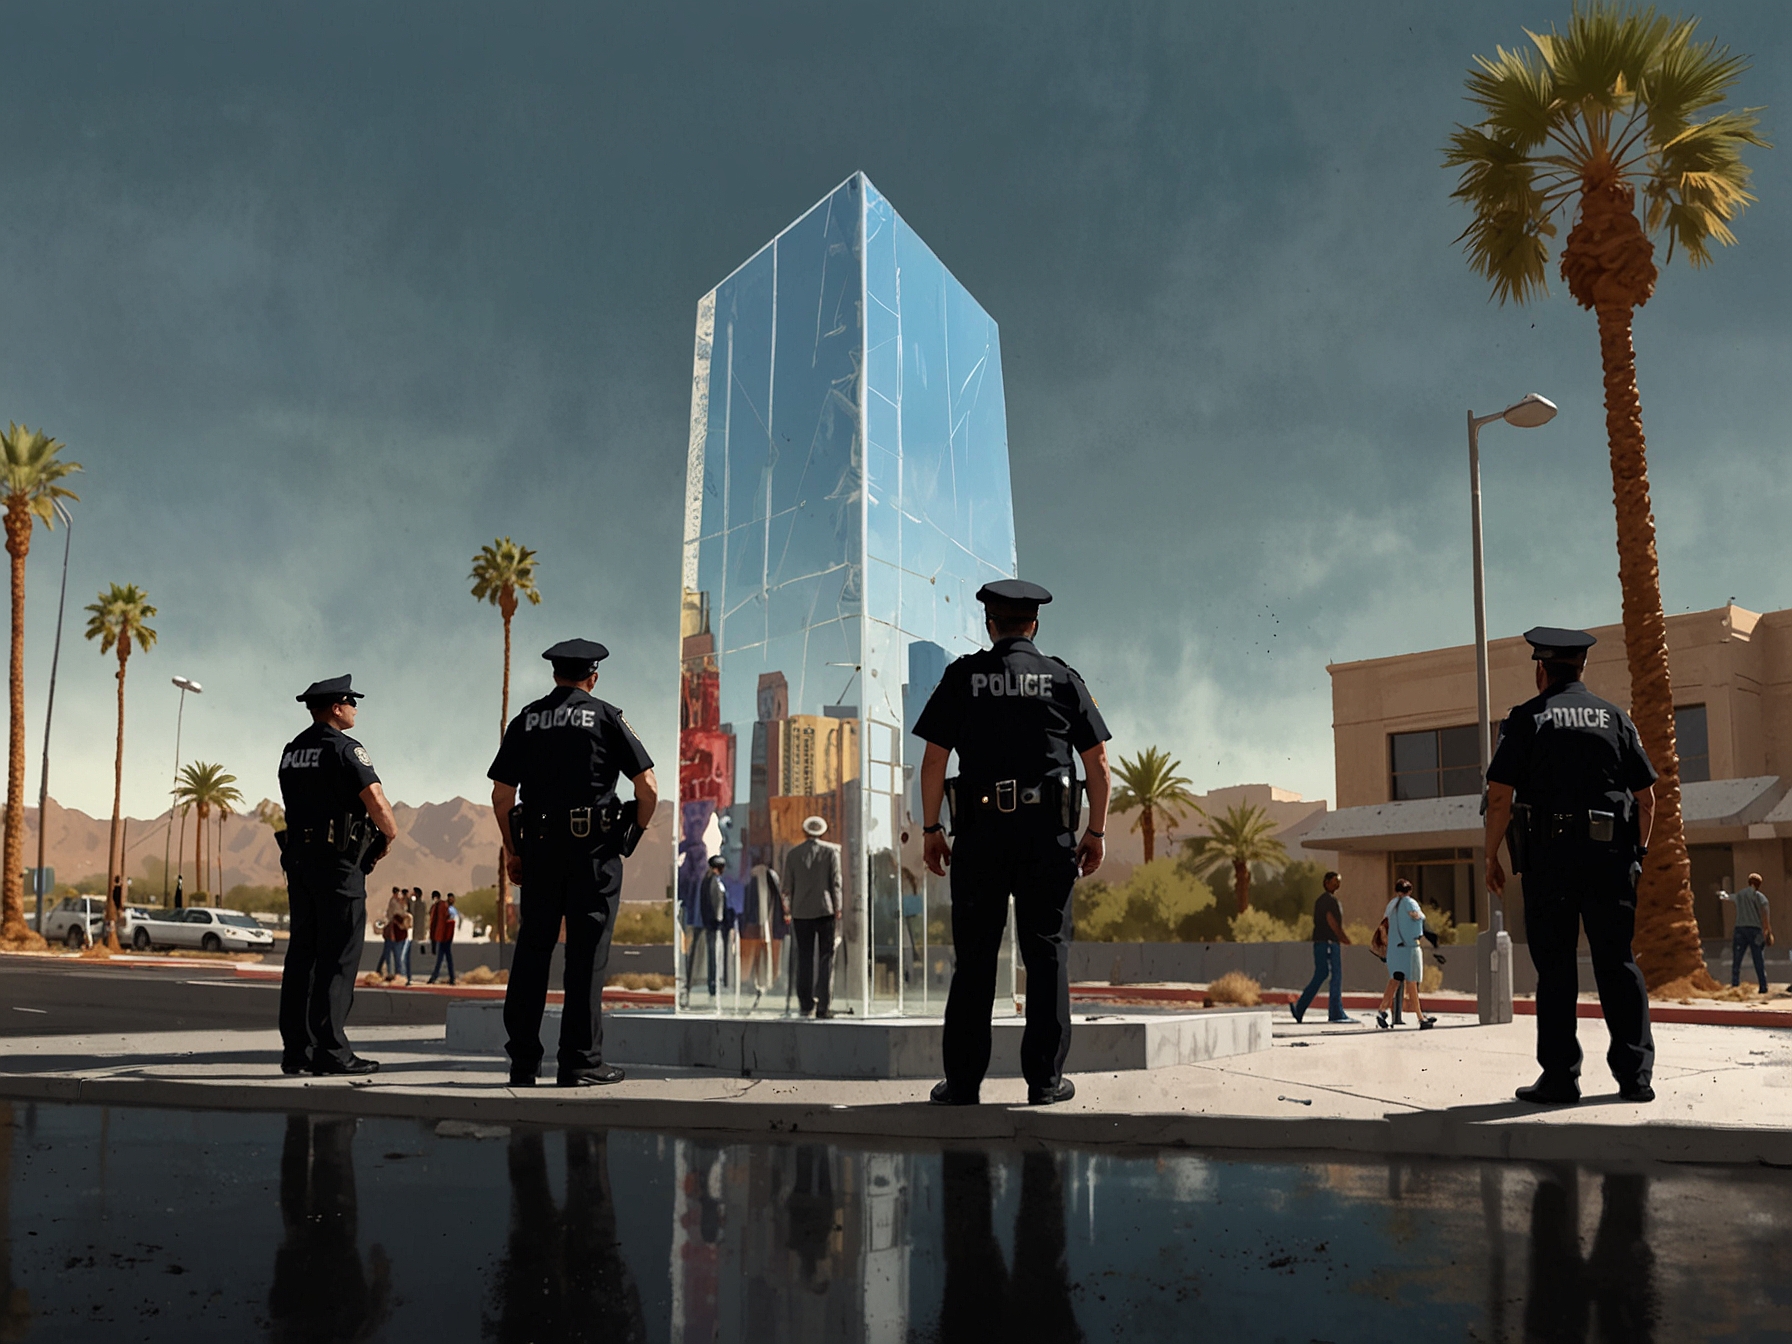 Police authorities removing the reflective monolith in Las Vegas while curious onlookers watch, highlighting the public interest and the mysterious allure of these metallic structures.